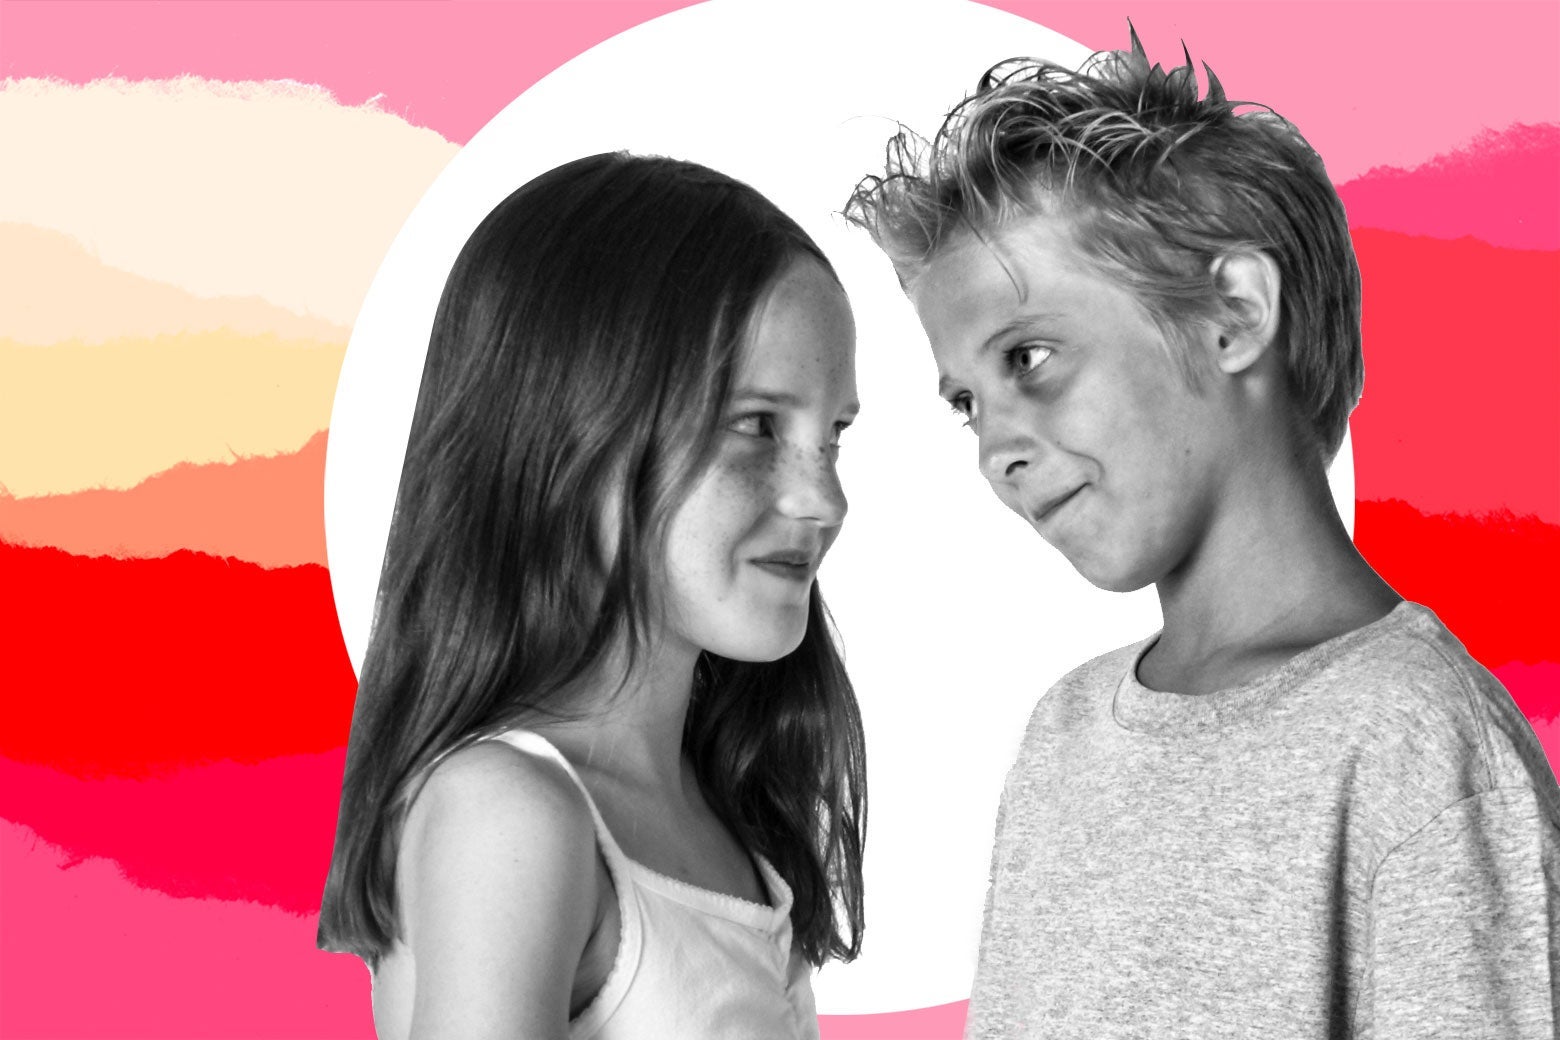 A young girl and a young boy face each other.